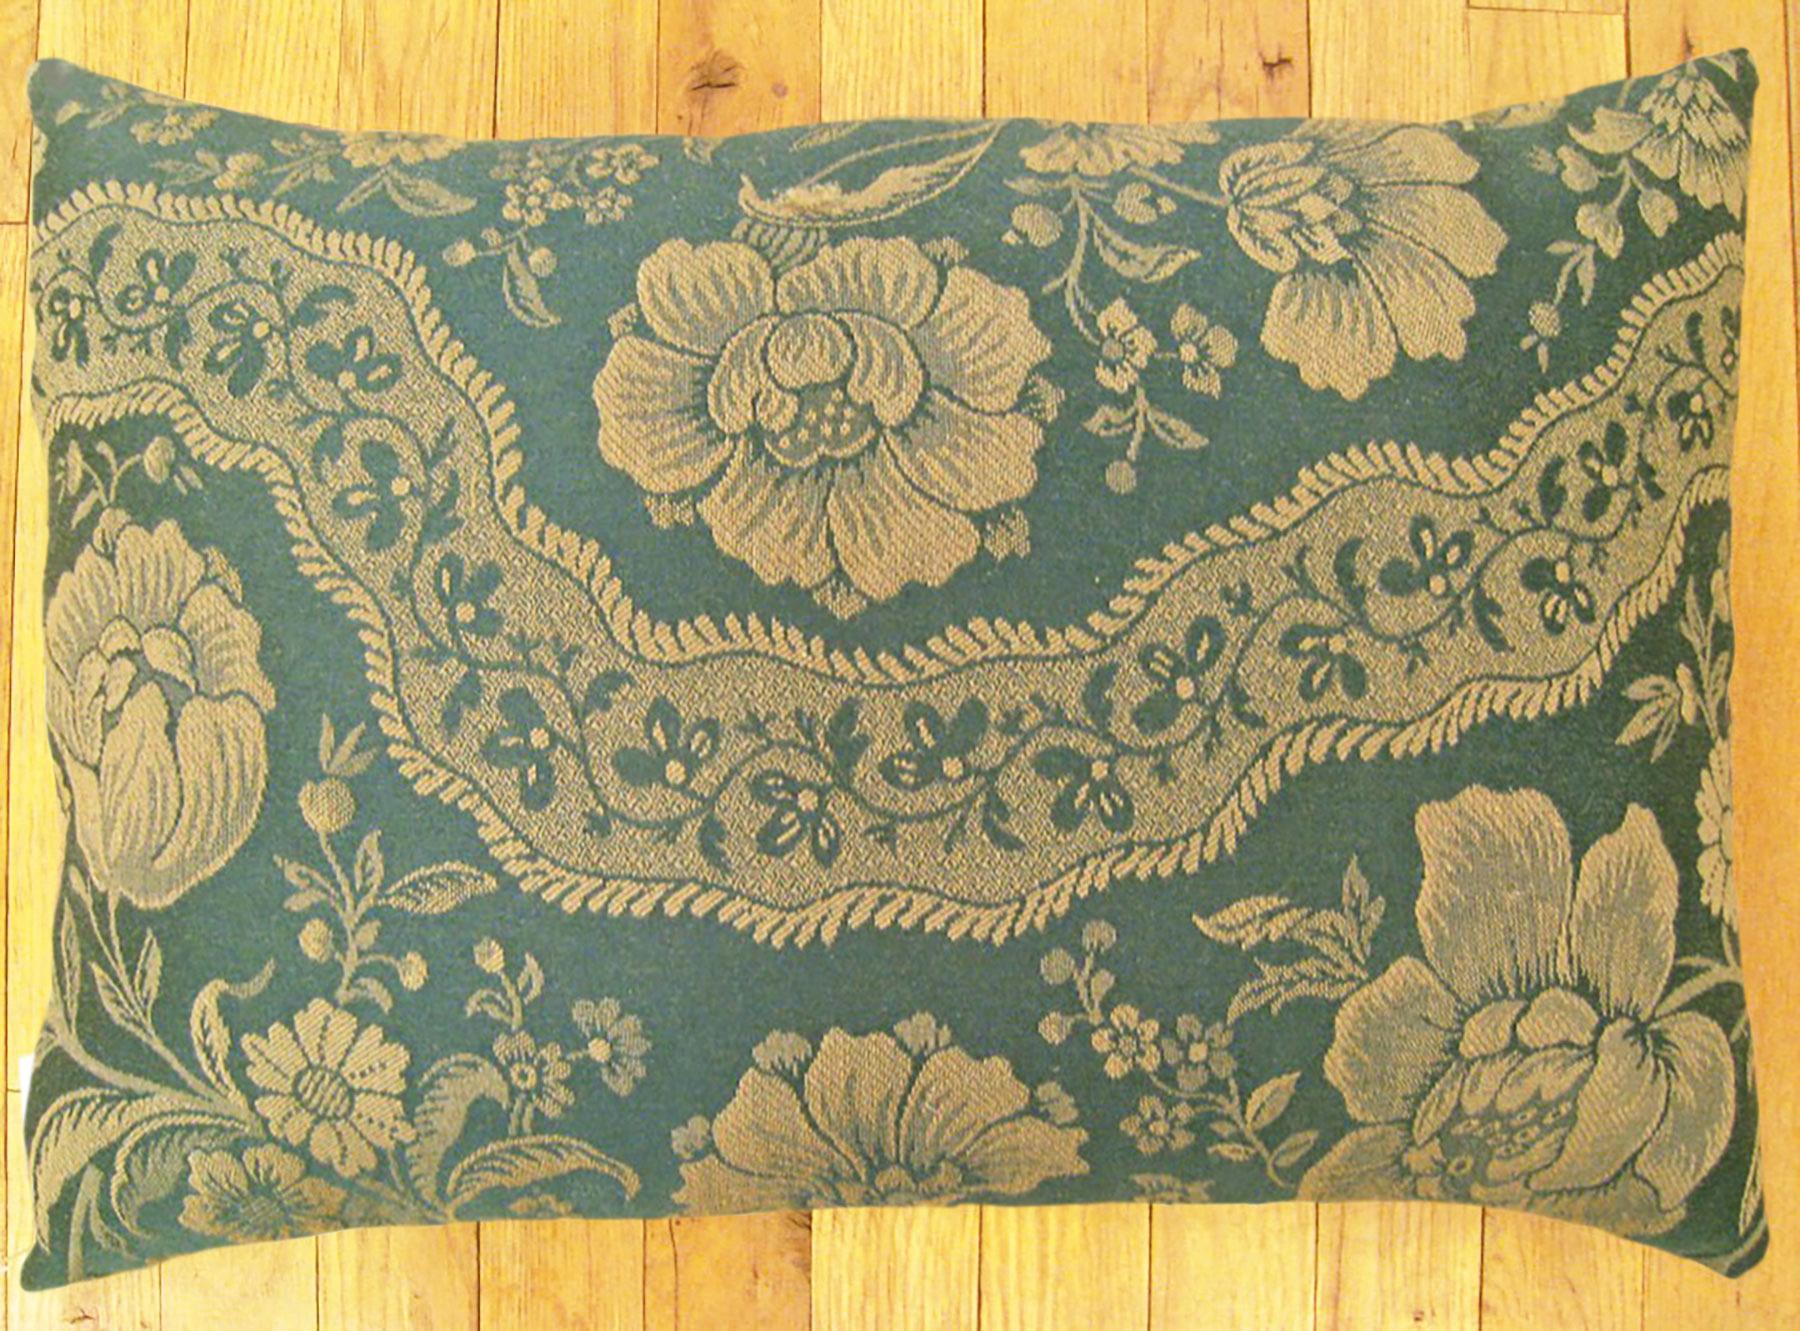 Vintage Decorative Pillow with Floral Chinoiserie ; size 1'9” x 1'3”.

A vintage decorative pillow with floral chinoiserie, size 1'9